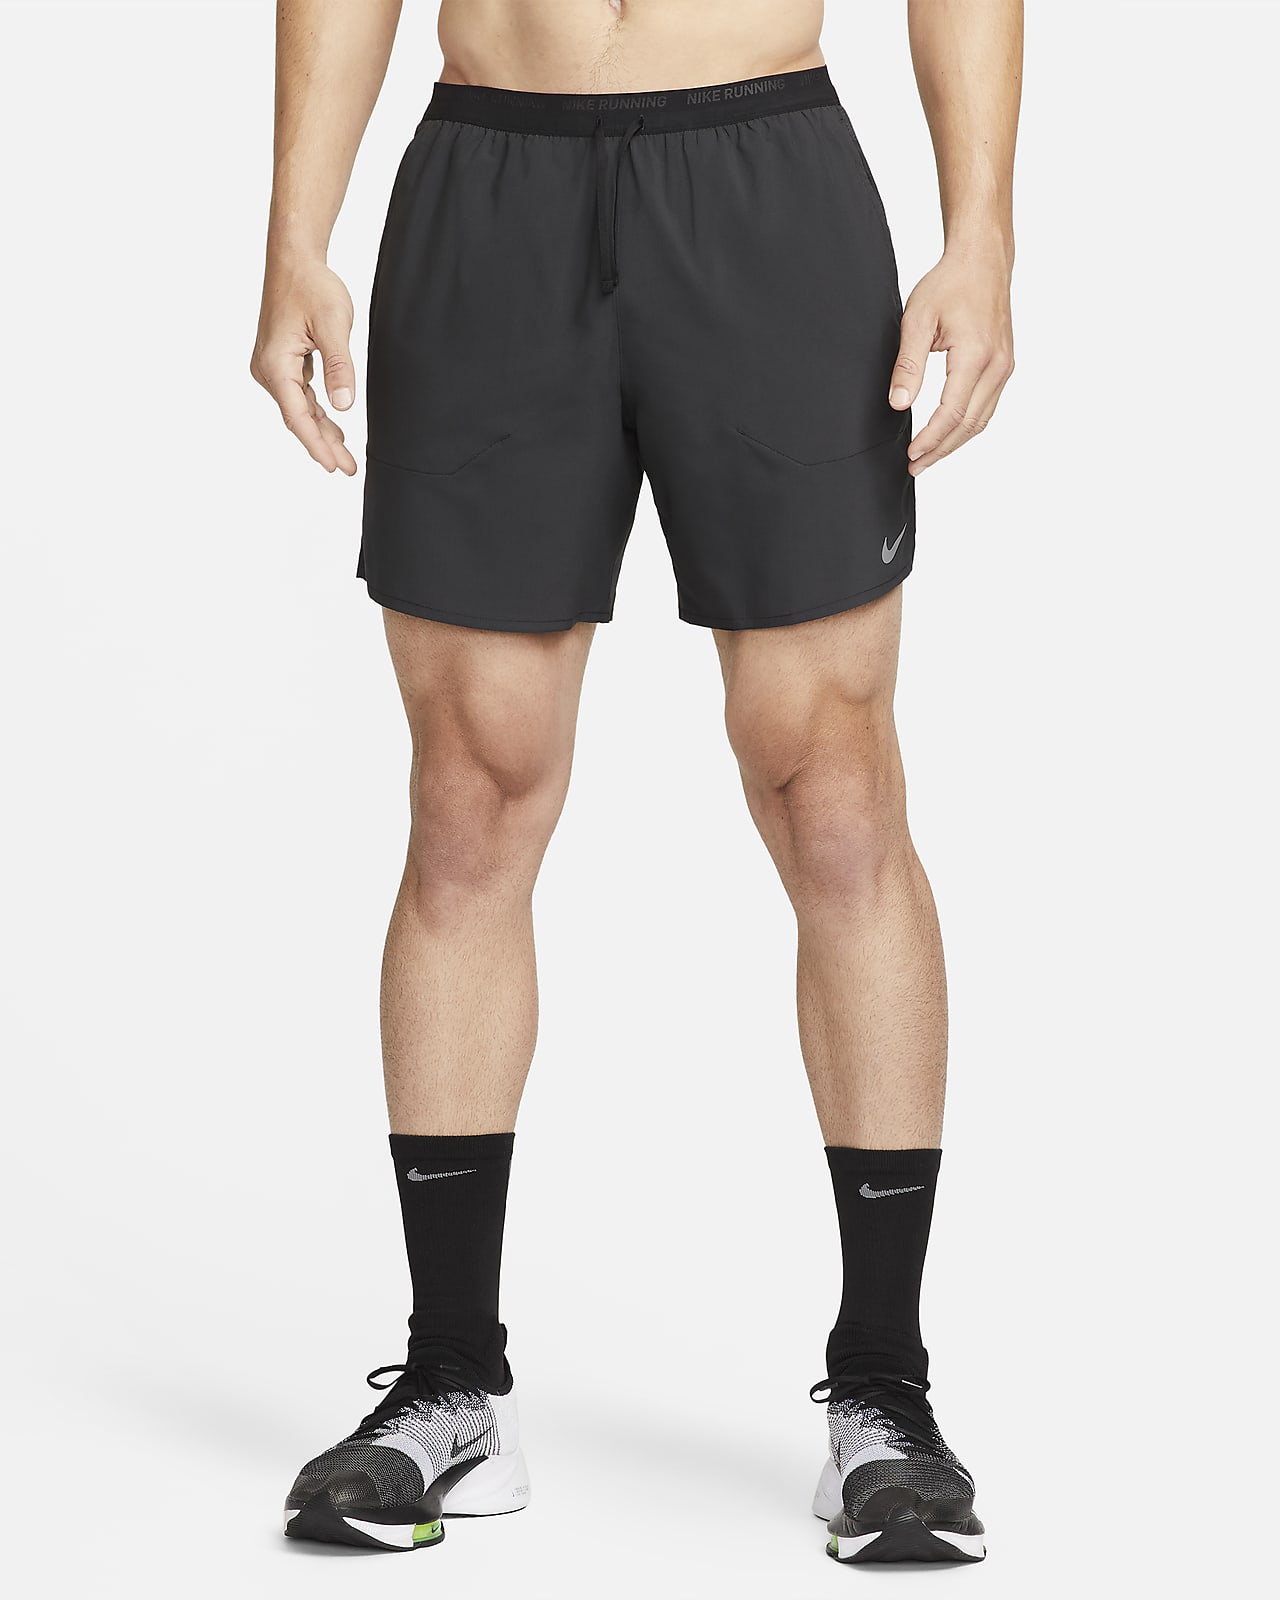 Stride Men's Dri-FIT 18cm (approx.) Brief-Lined Running Shorts.